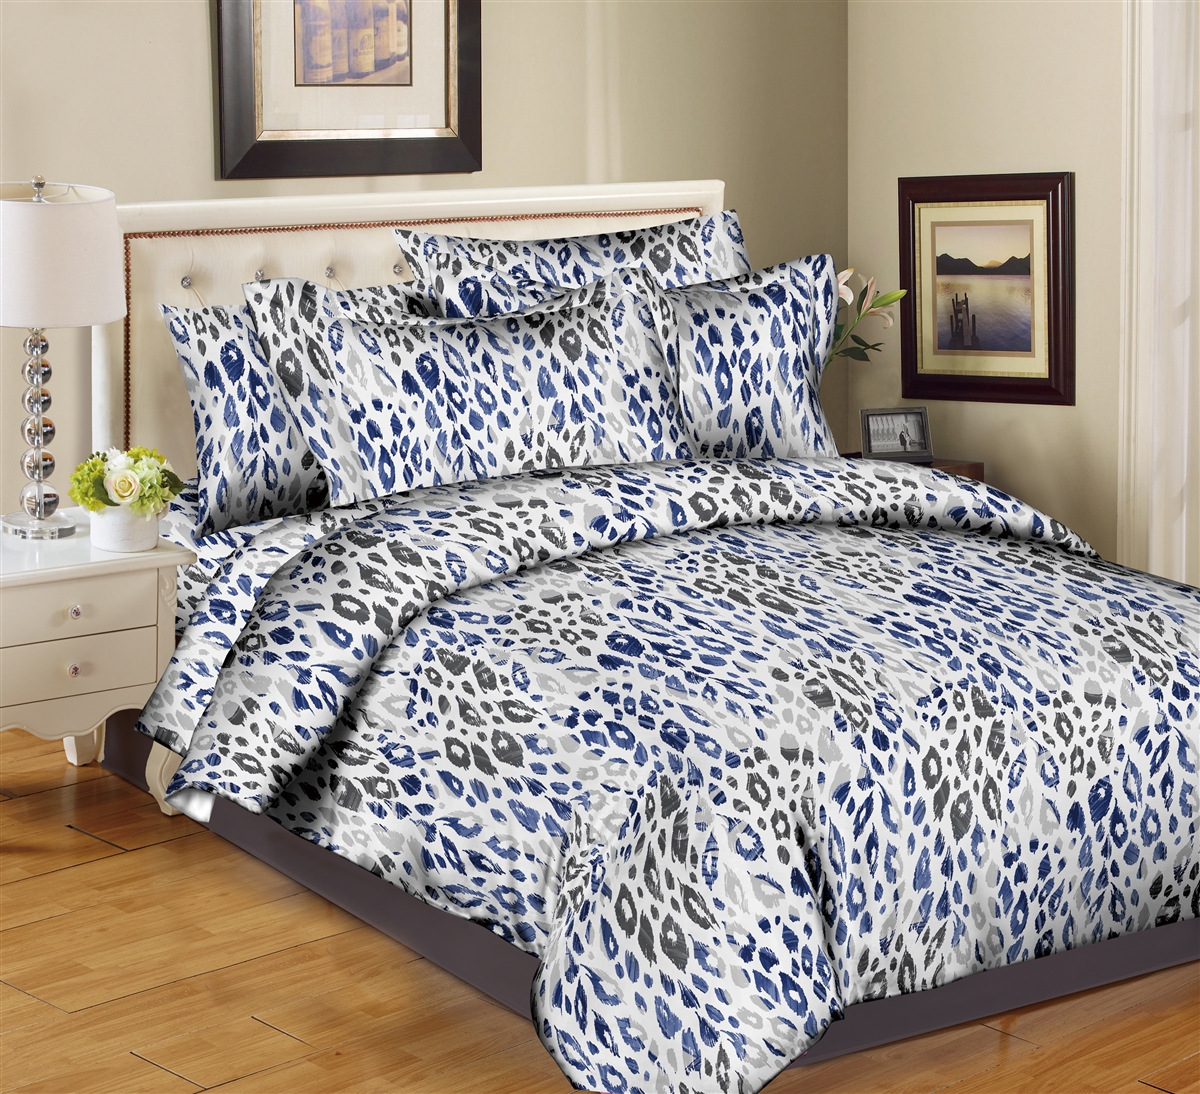 Better Bed Collection: Leopard Trend- Blue 8PC Twin Bedding Set